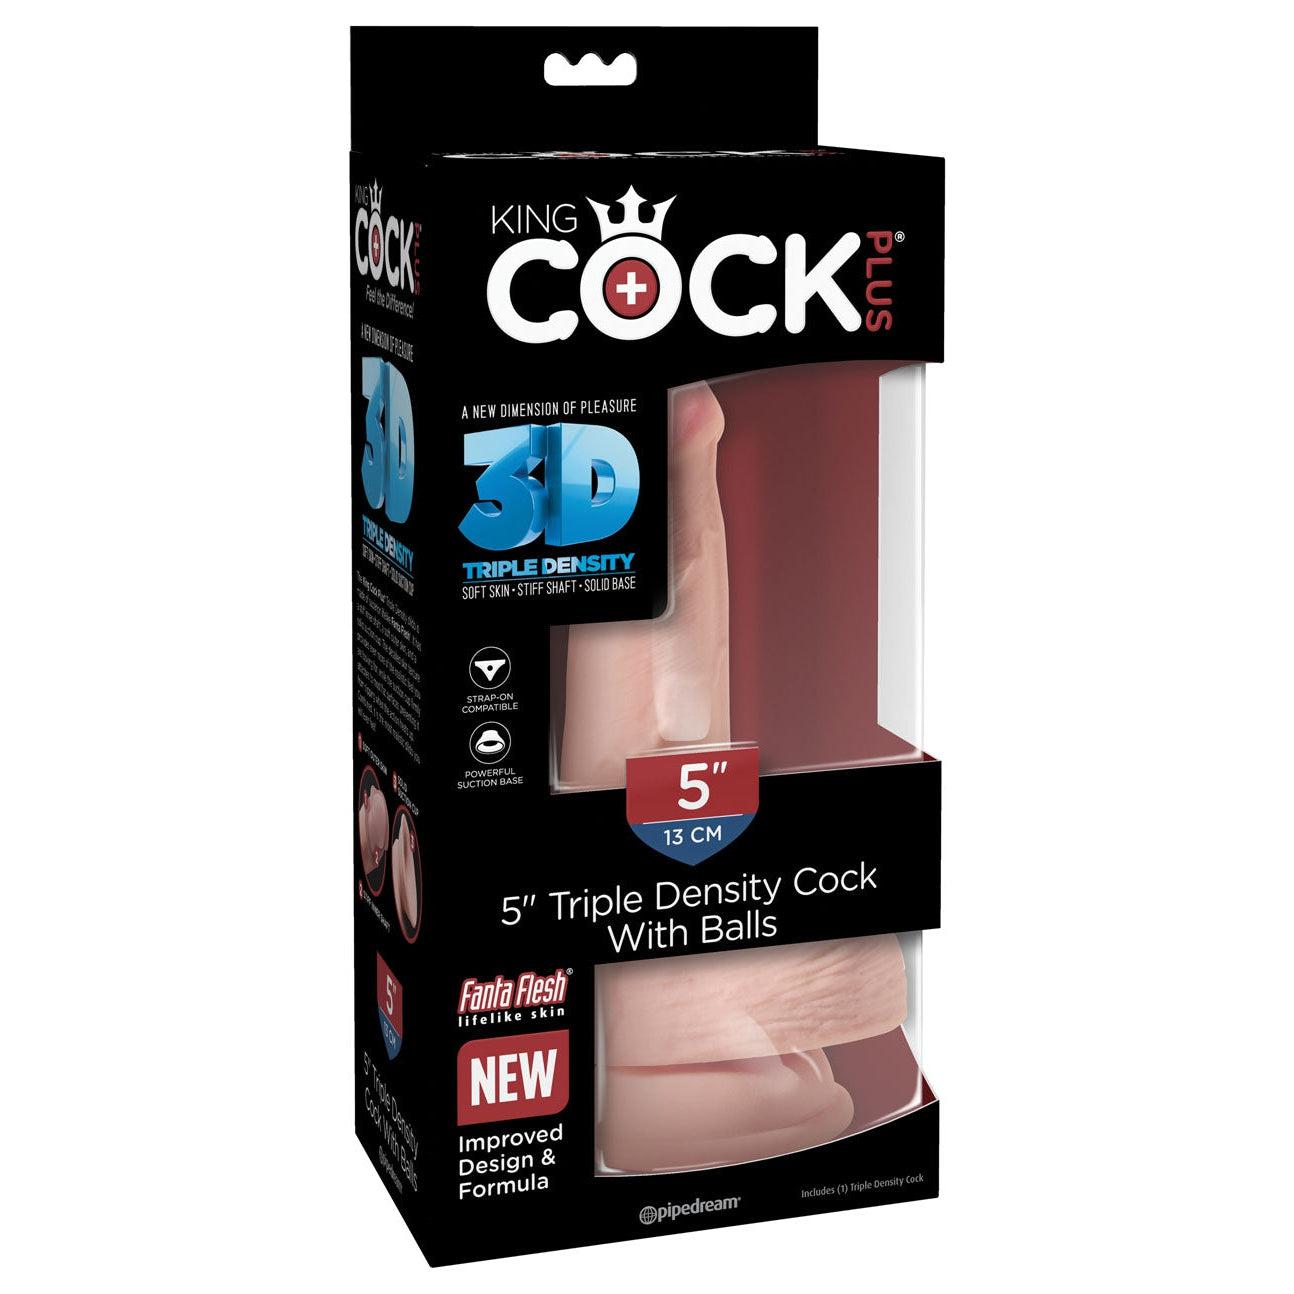 King Cock Plus Triple Density 5 Inch Cock With Balls - Flesh